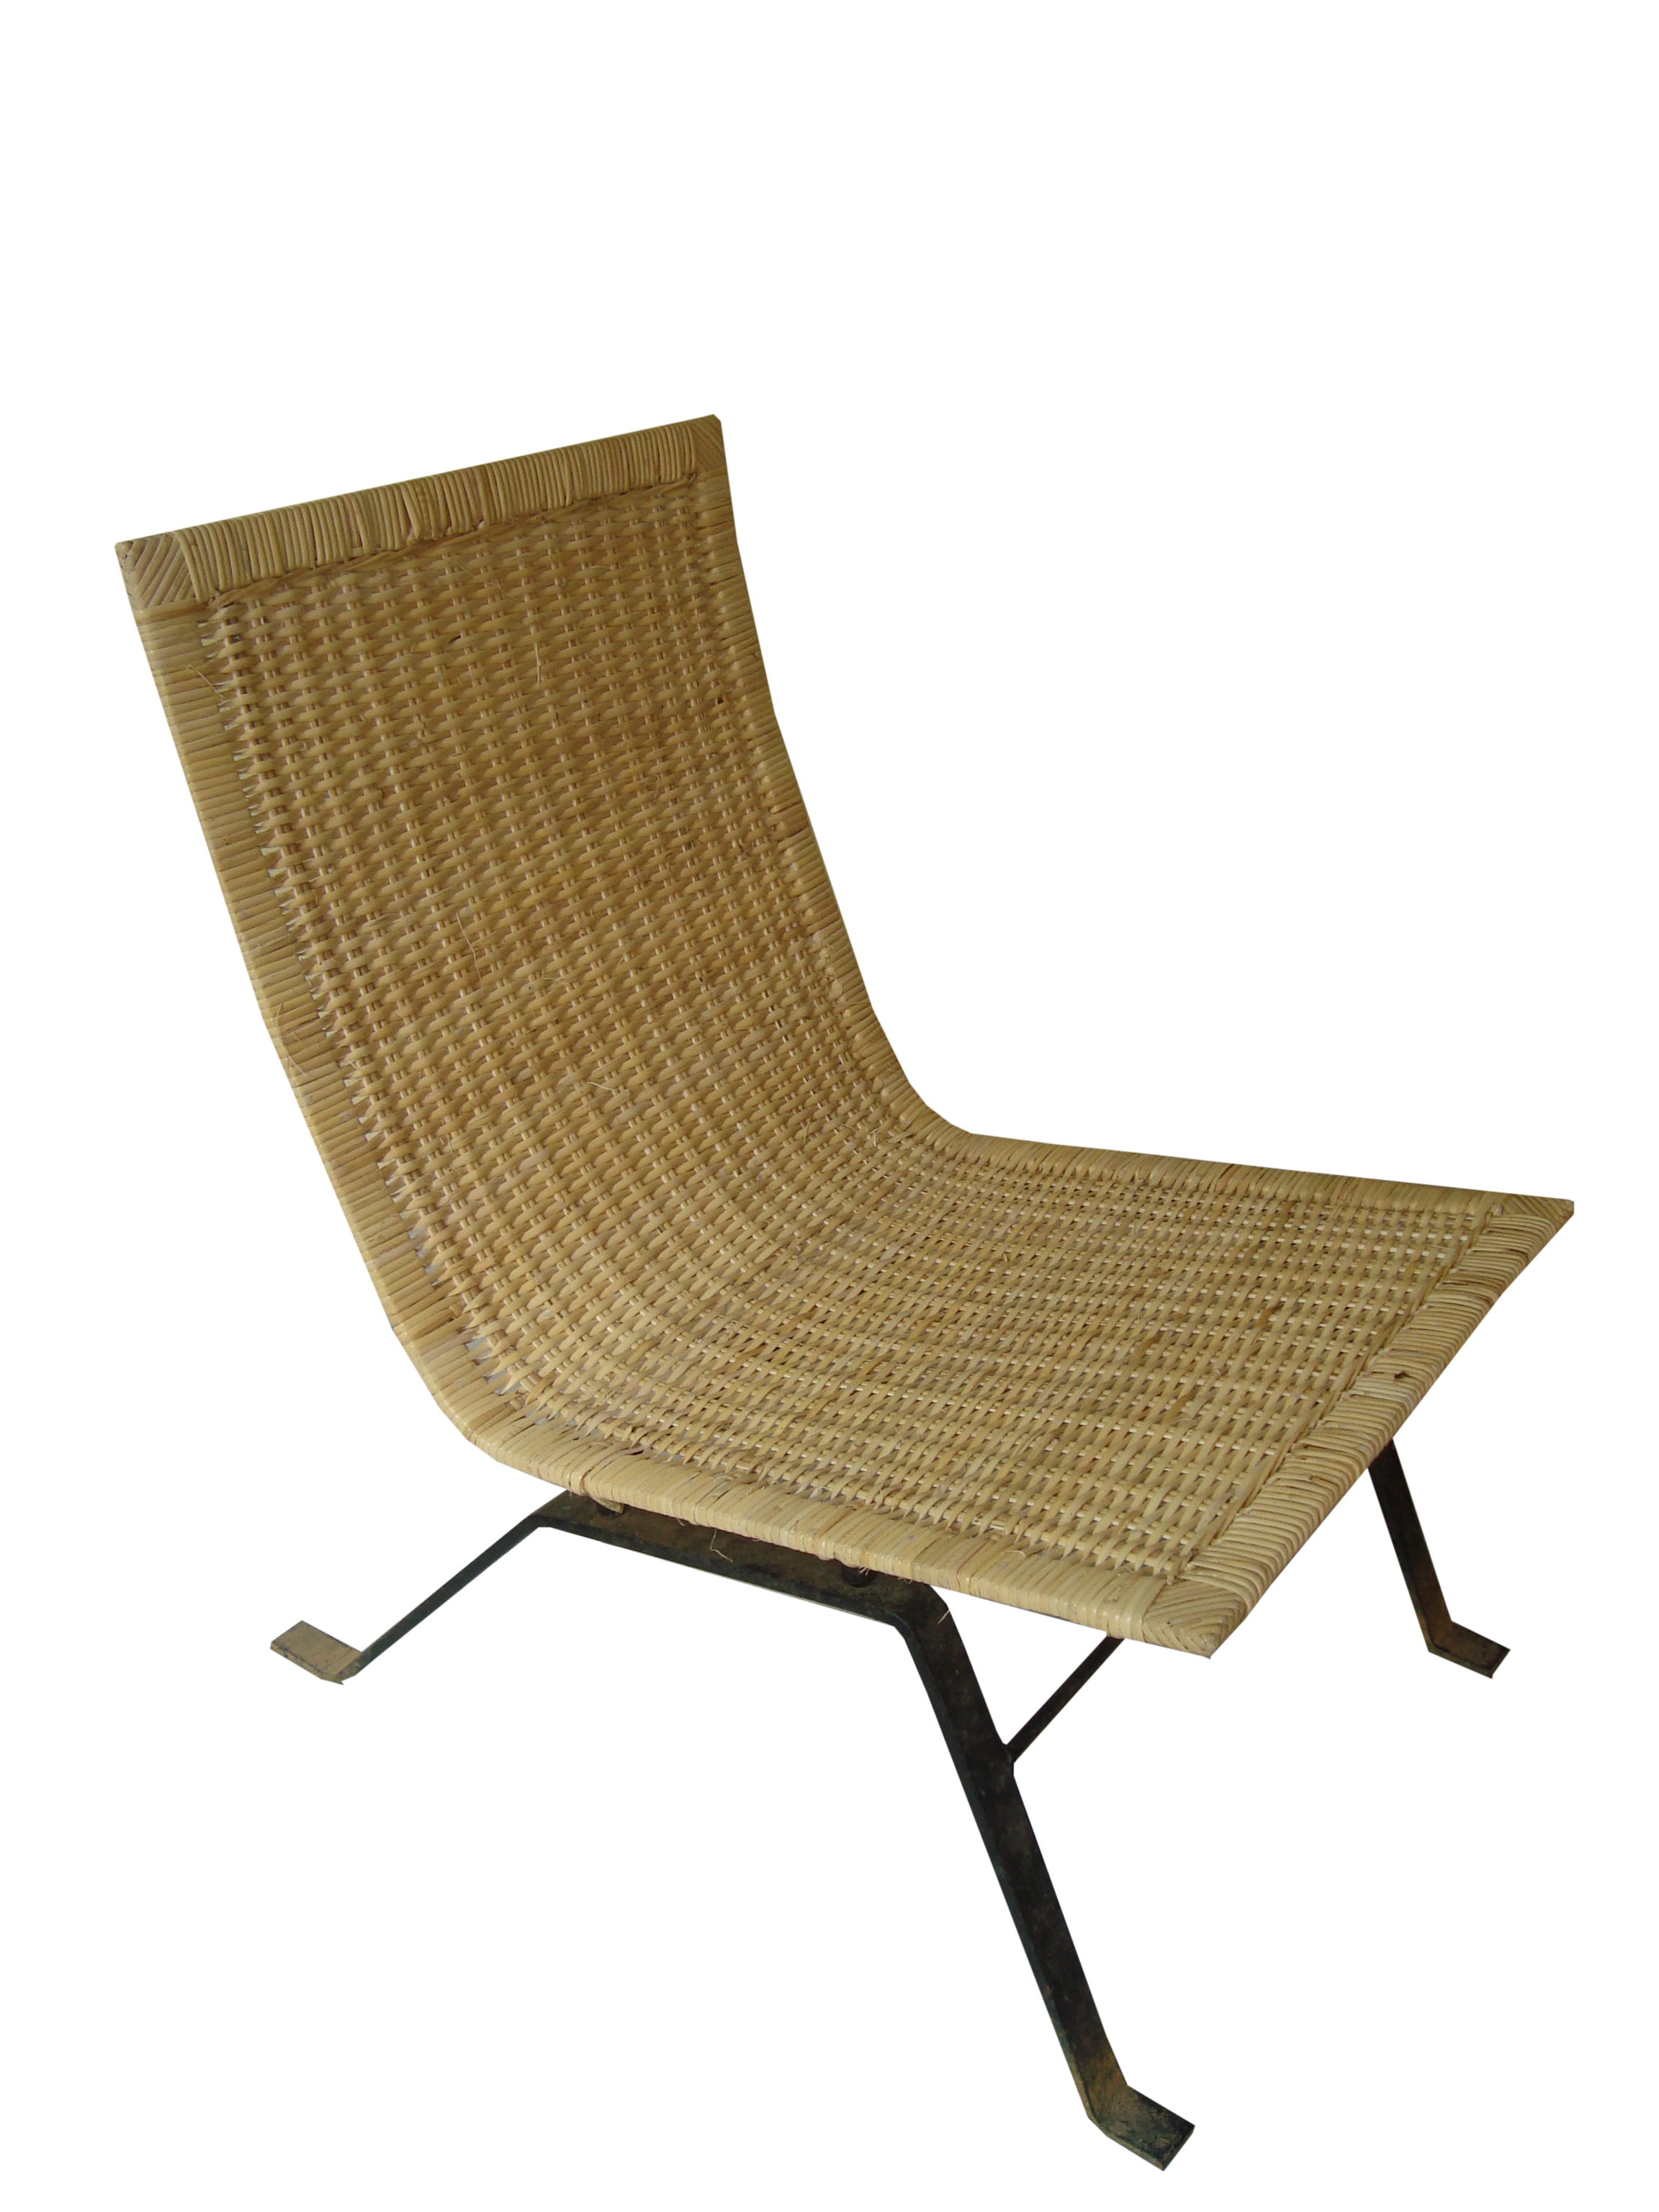 Inclined lounge chair made of rattan with wrought iron legs